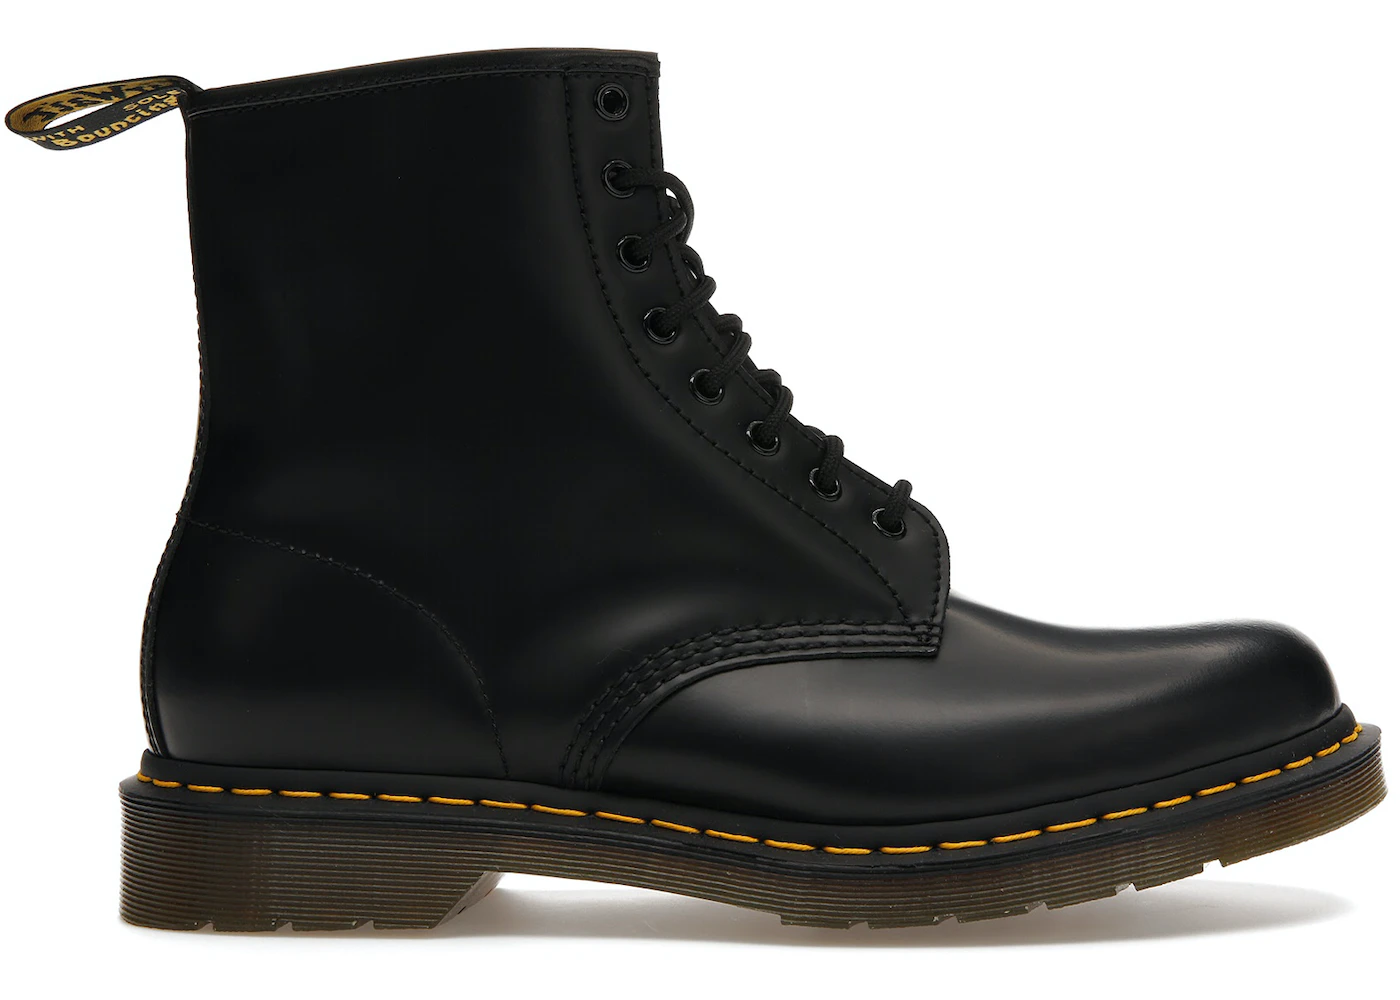 inrichting Bevatten Federaal Dr. Martens 1460 Smooth Leather Lace Up Boot Black Men's - 11822006 - US